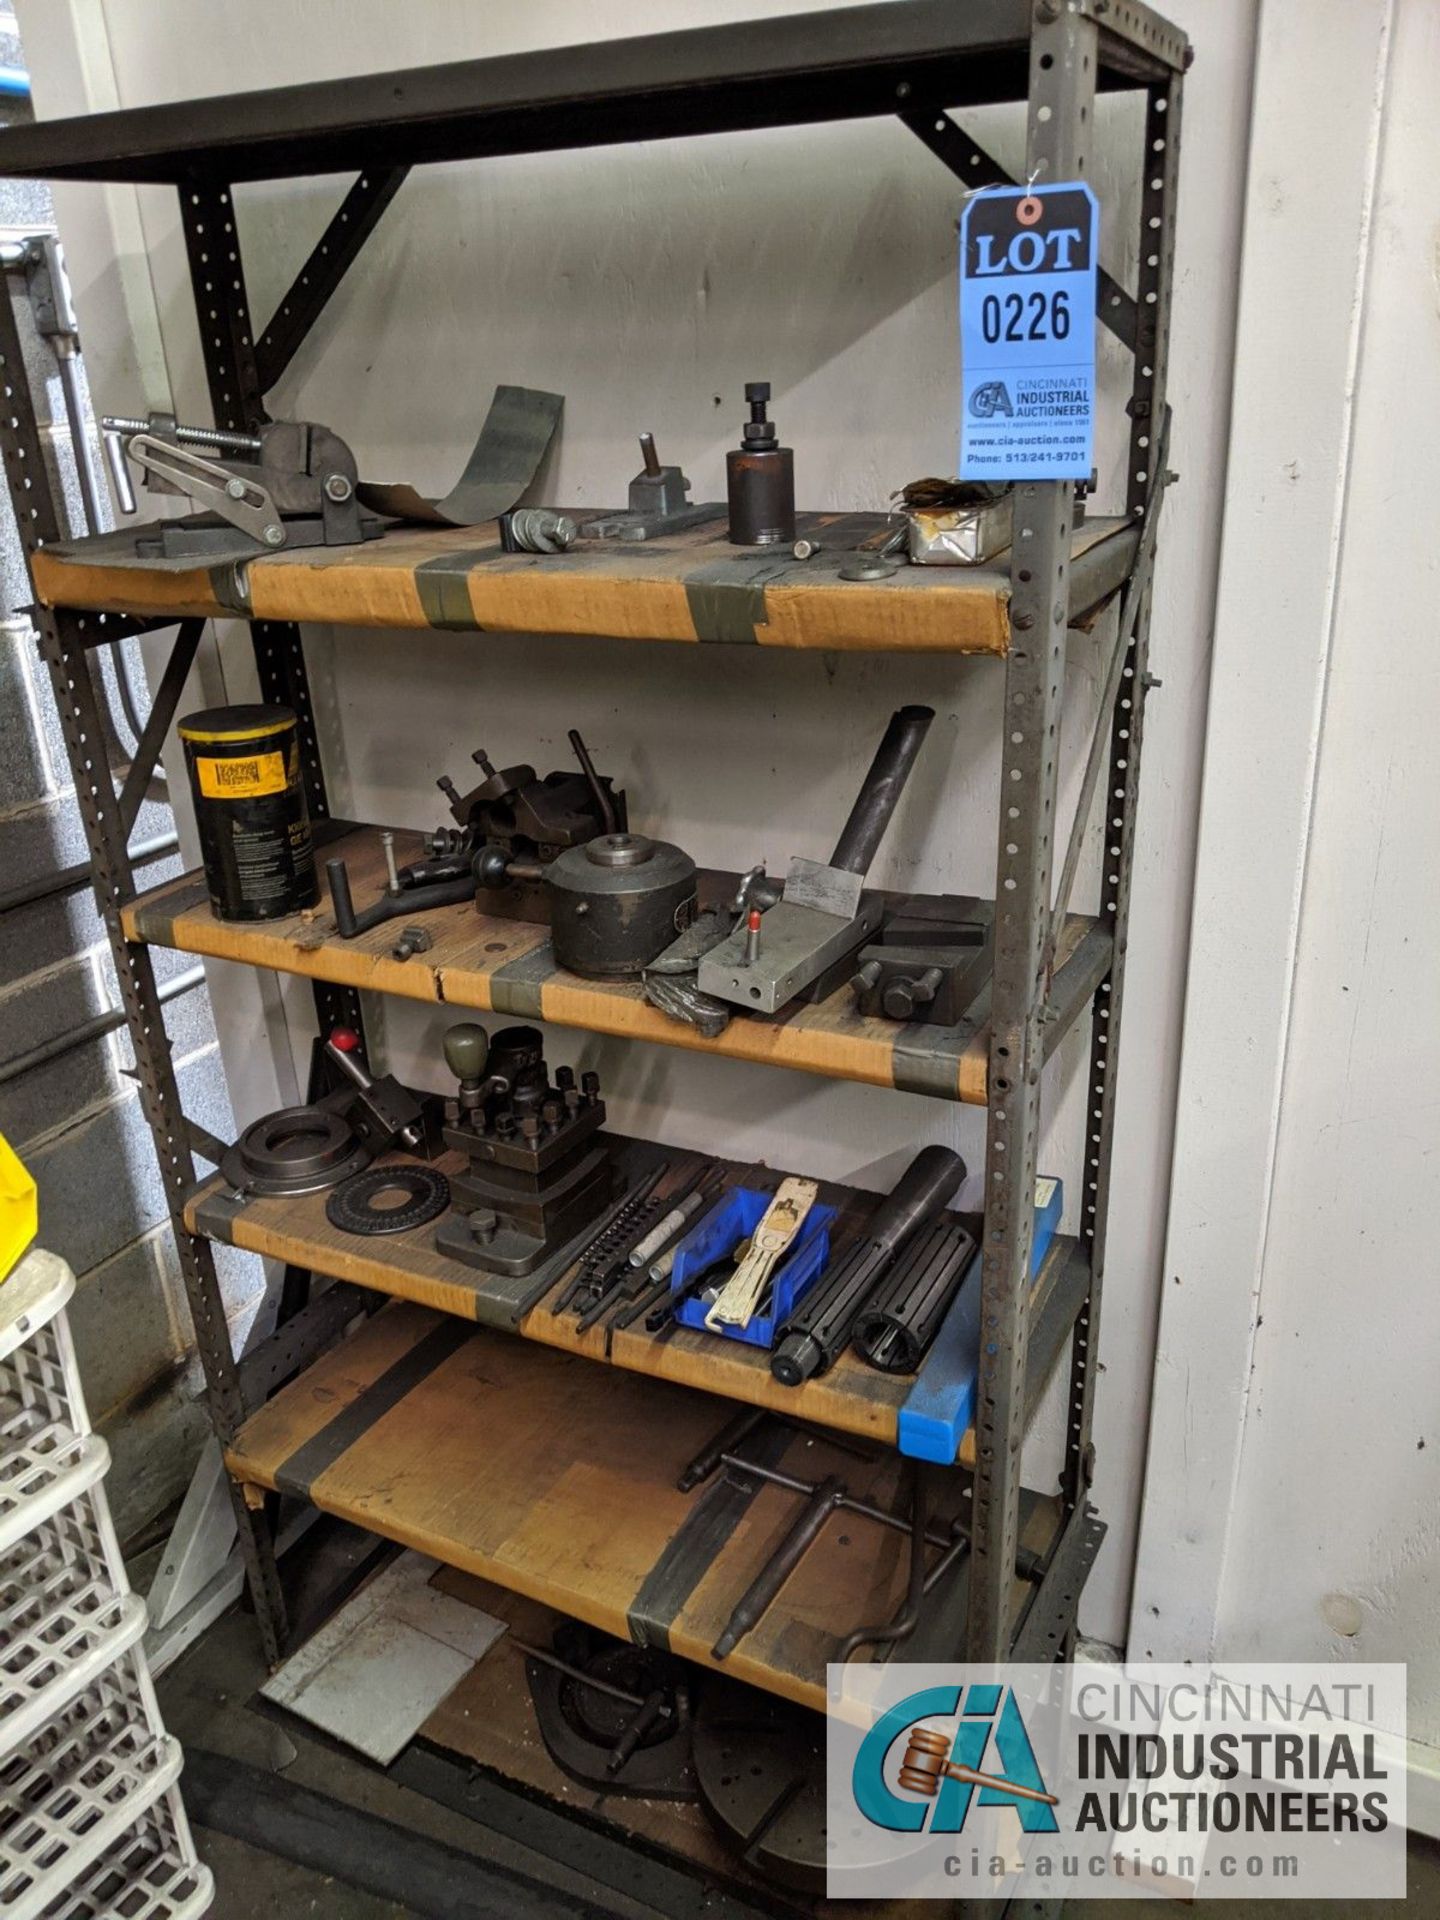 (LOT) SHELF UNIT WITH GRINDING FIXTURES AND ACCESSORIES AND GRINDING WHEELS ON WALL